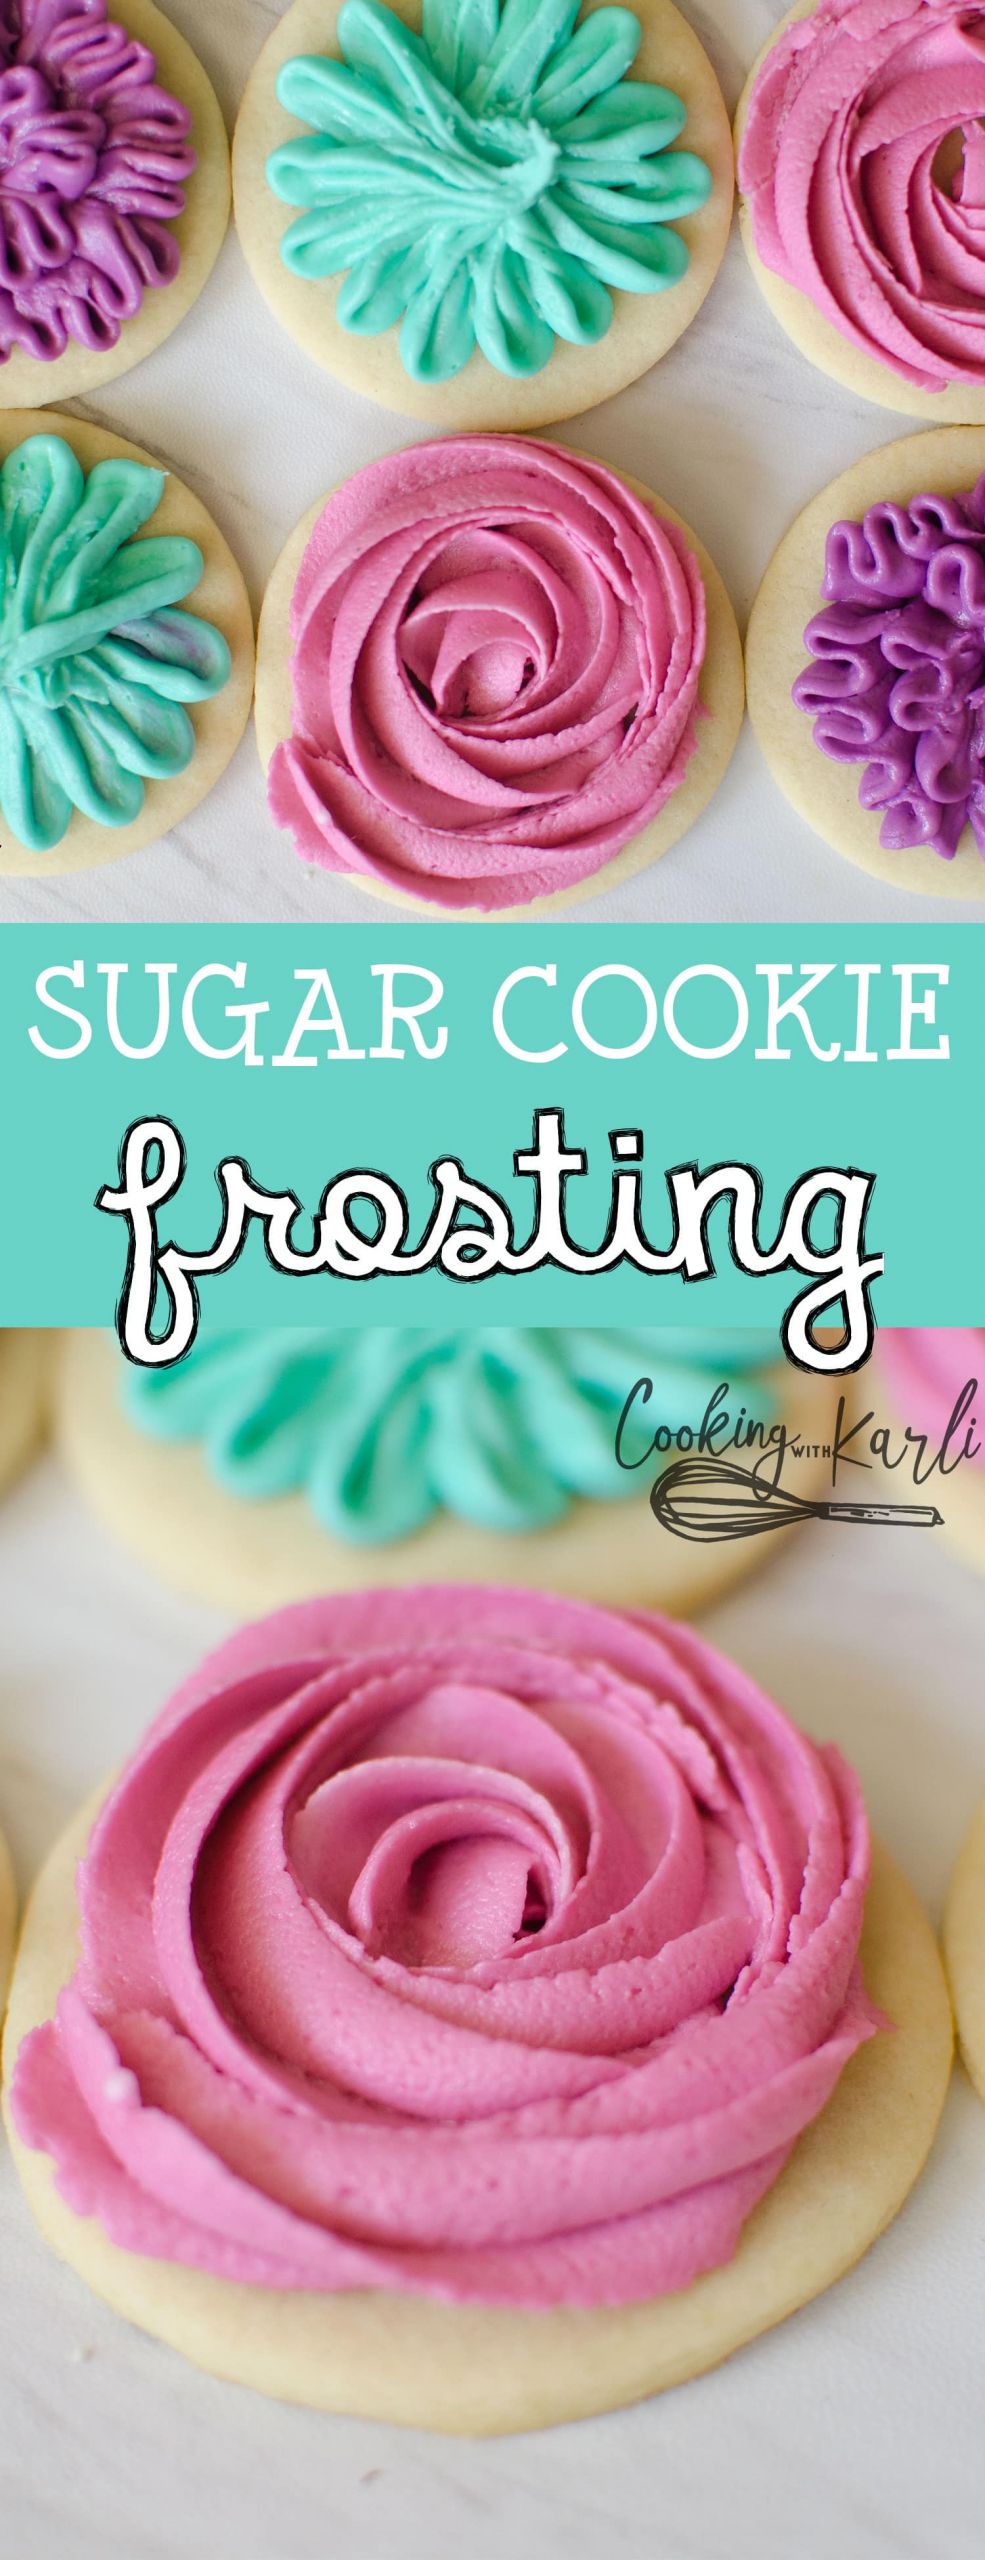 Cookie Frosting Recipes
 Sugar Cookie Frosting Cooking With Karli